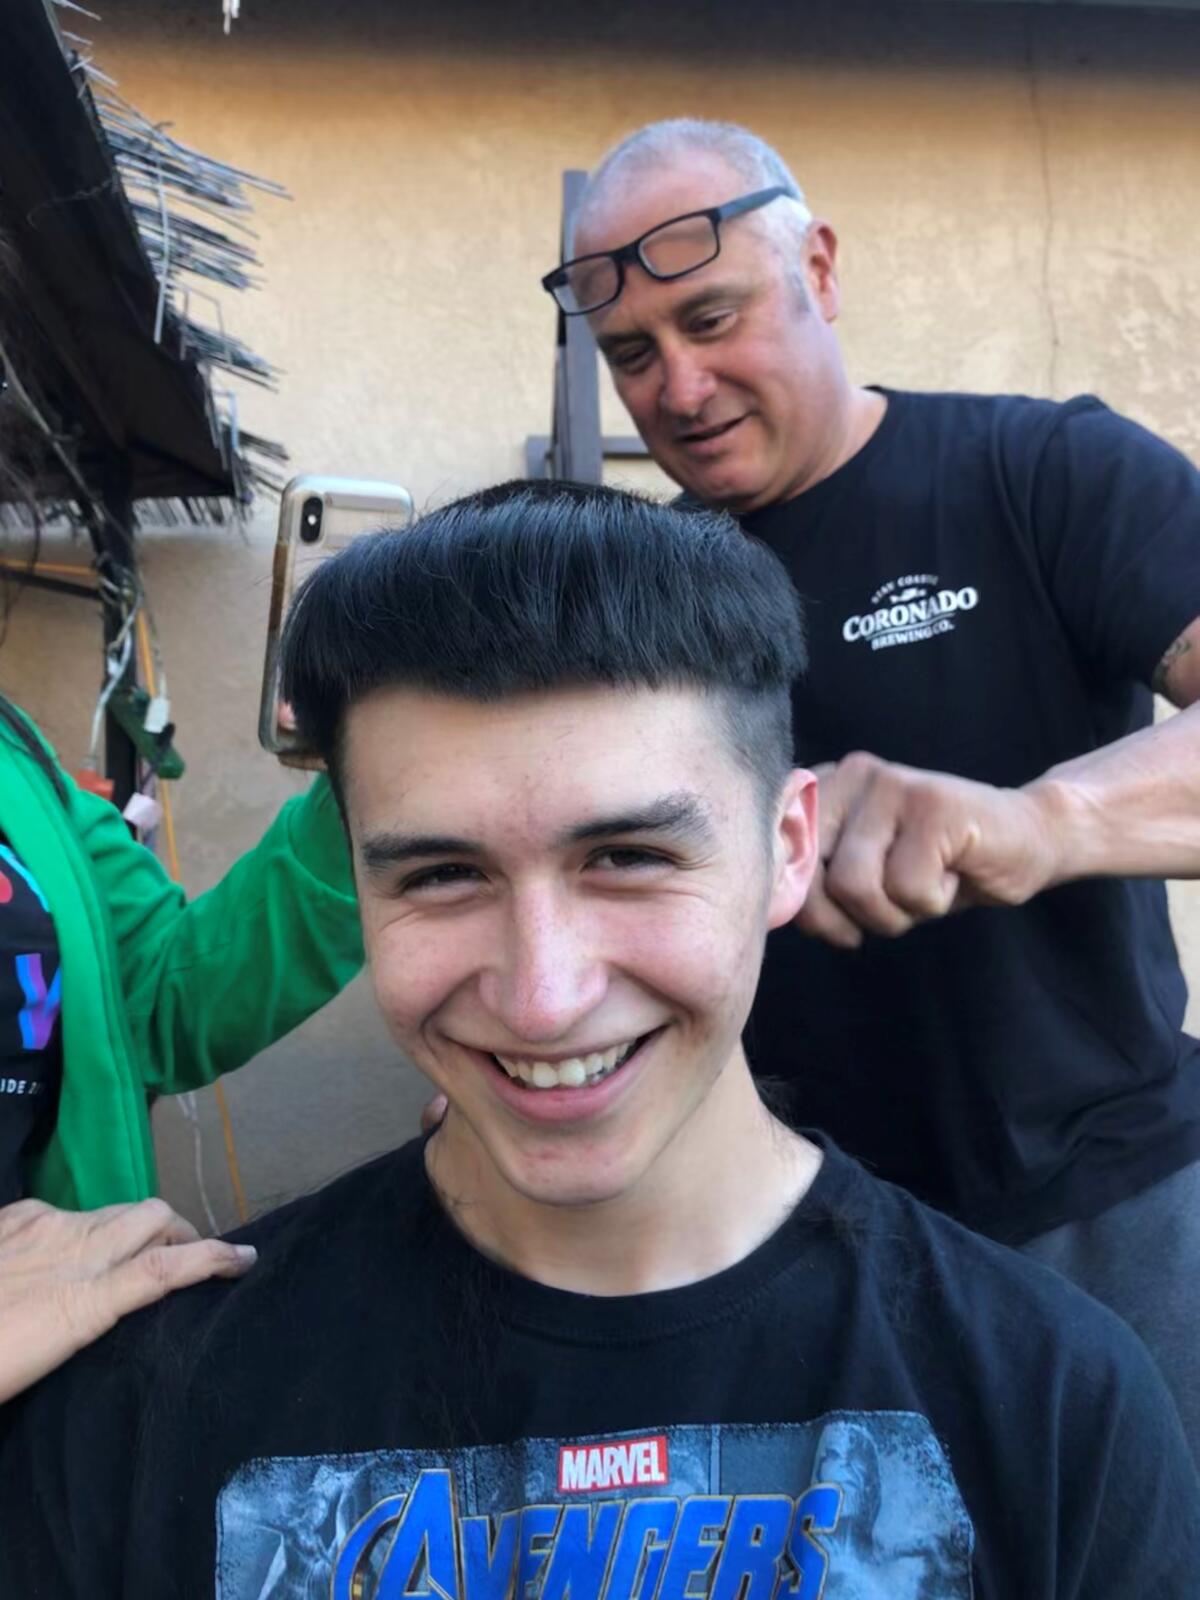 Steven Alvarez, 19, laughs as his dad, Steve Alvarez, gives him a monk hairstyle during a home hair-cutting livestream March 23 in the family's Chula Vista backyard.